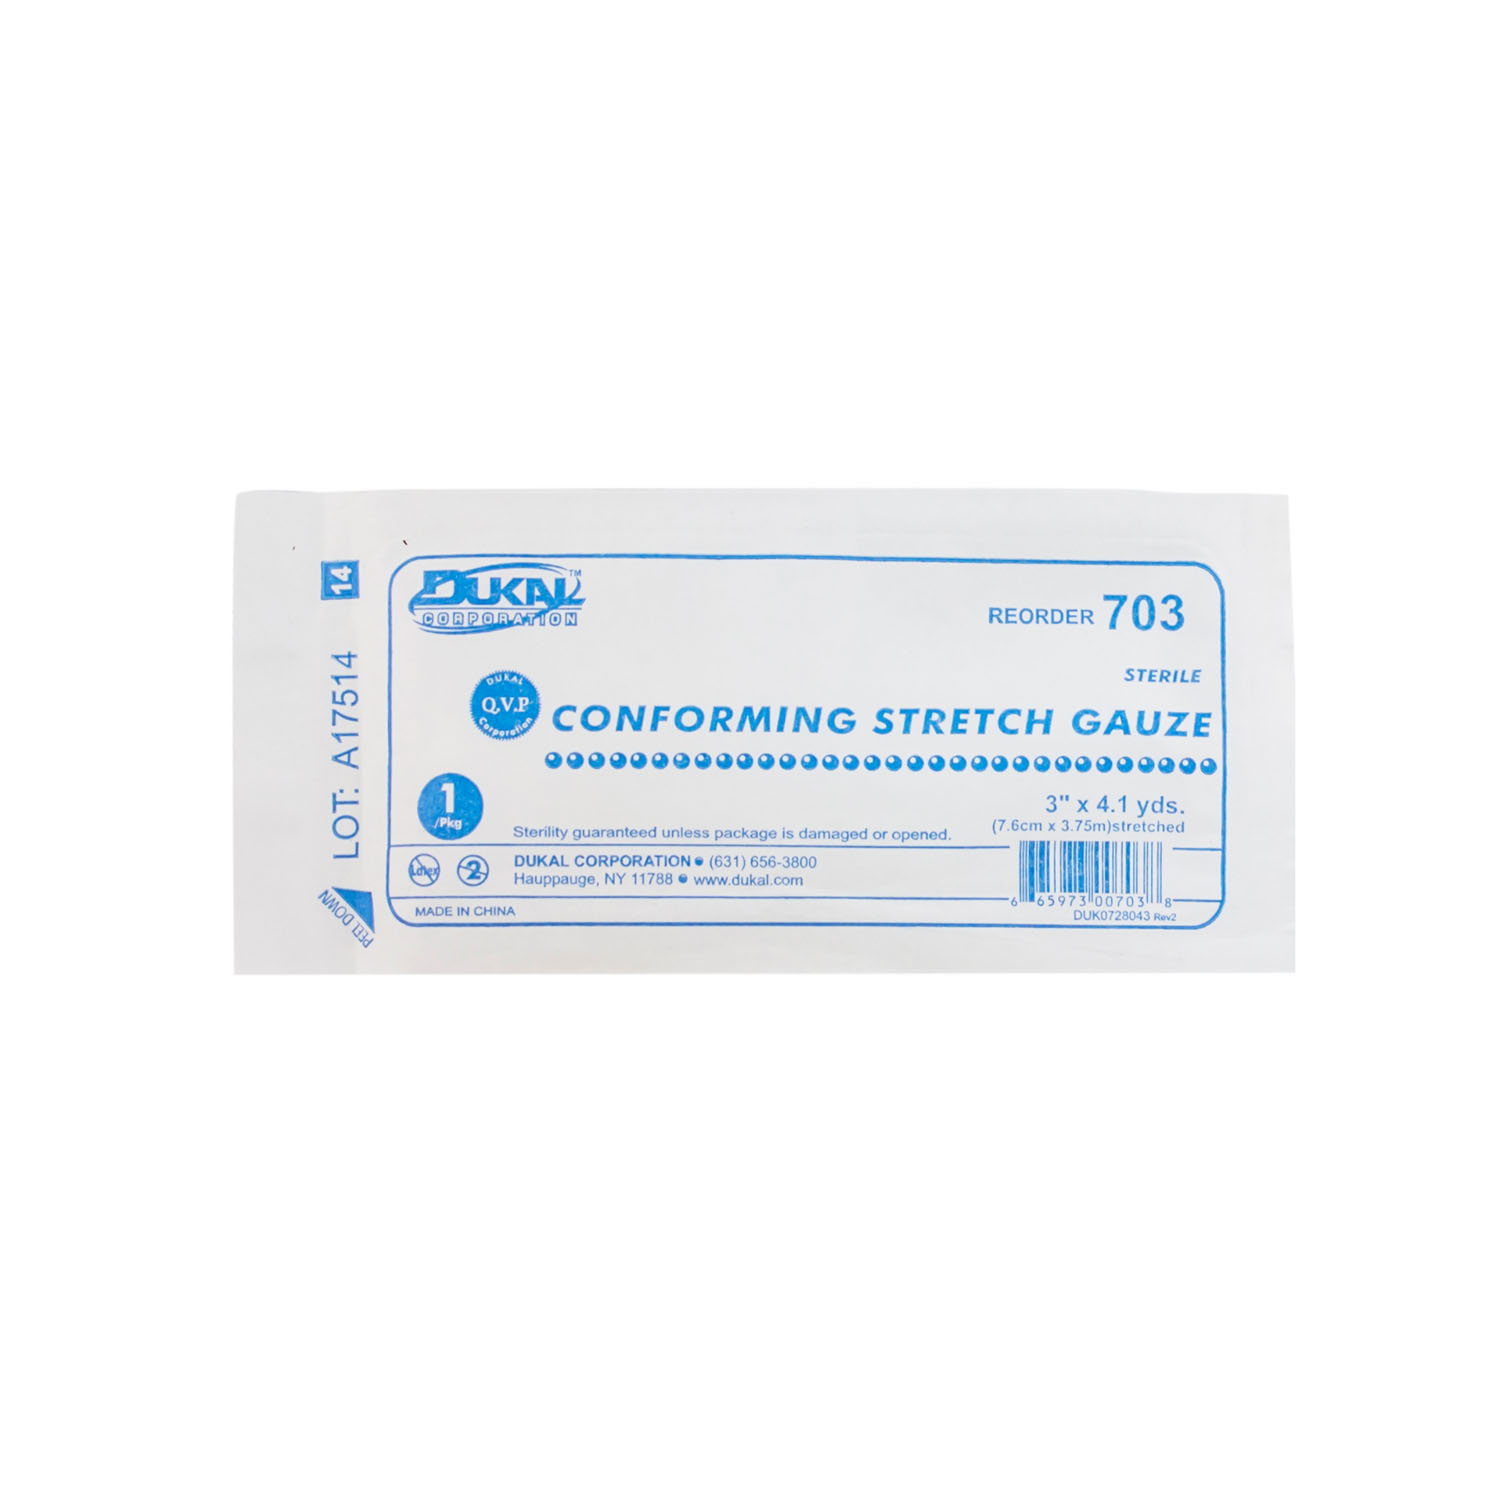 DUKAL CONFORMING STRETCH GAUZE : 703 BX                       $6.50 Stocked